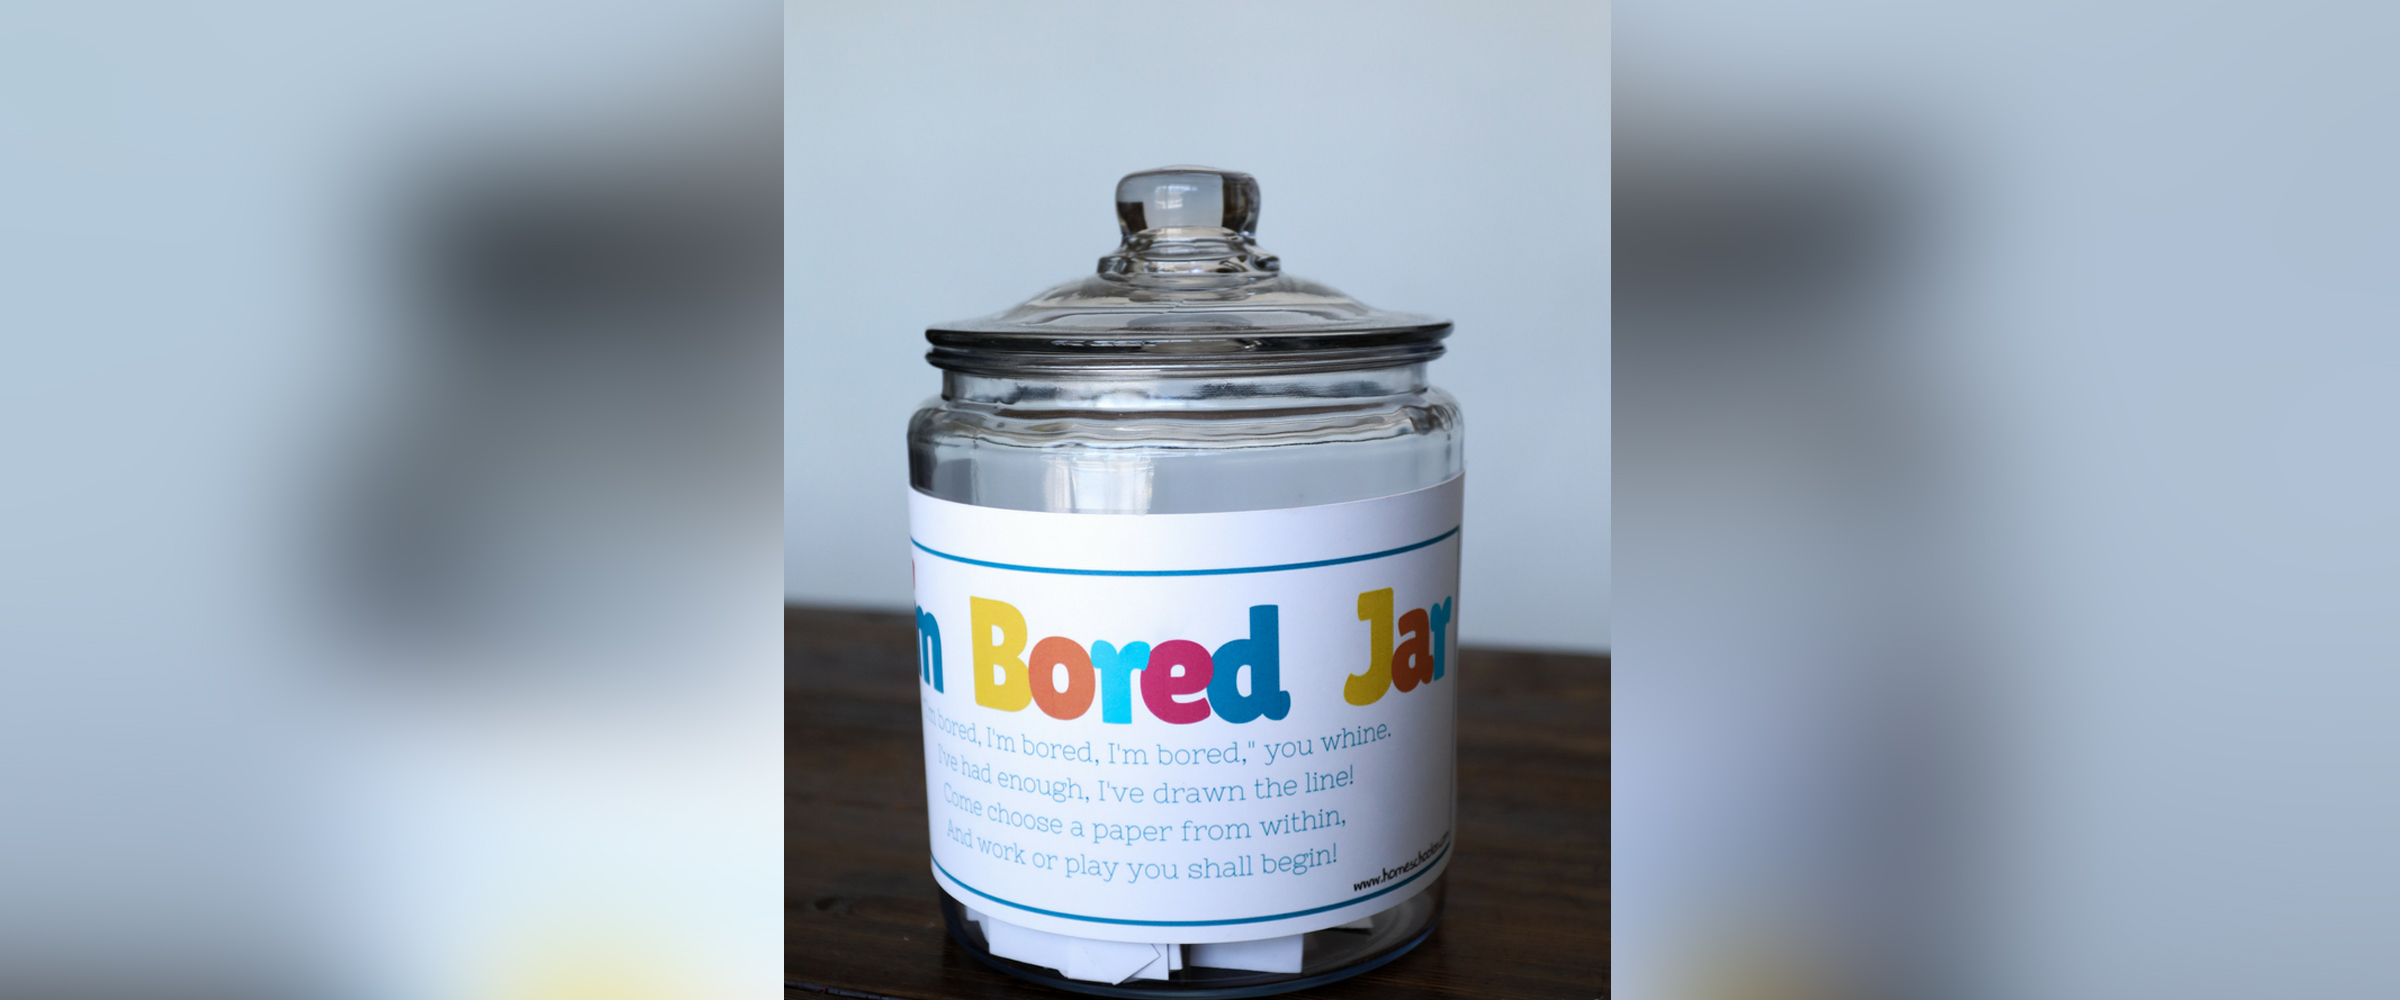 PHOTO: When the kids say "I'm bored" this summer, have them pick an activity out of the "bored jar."